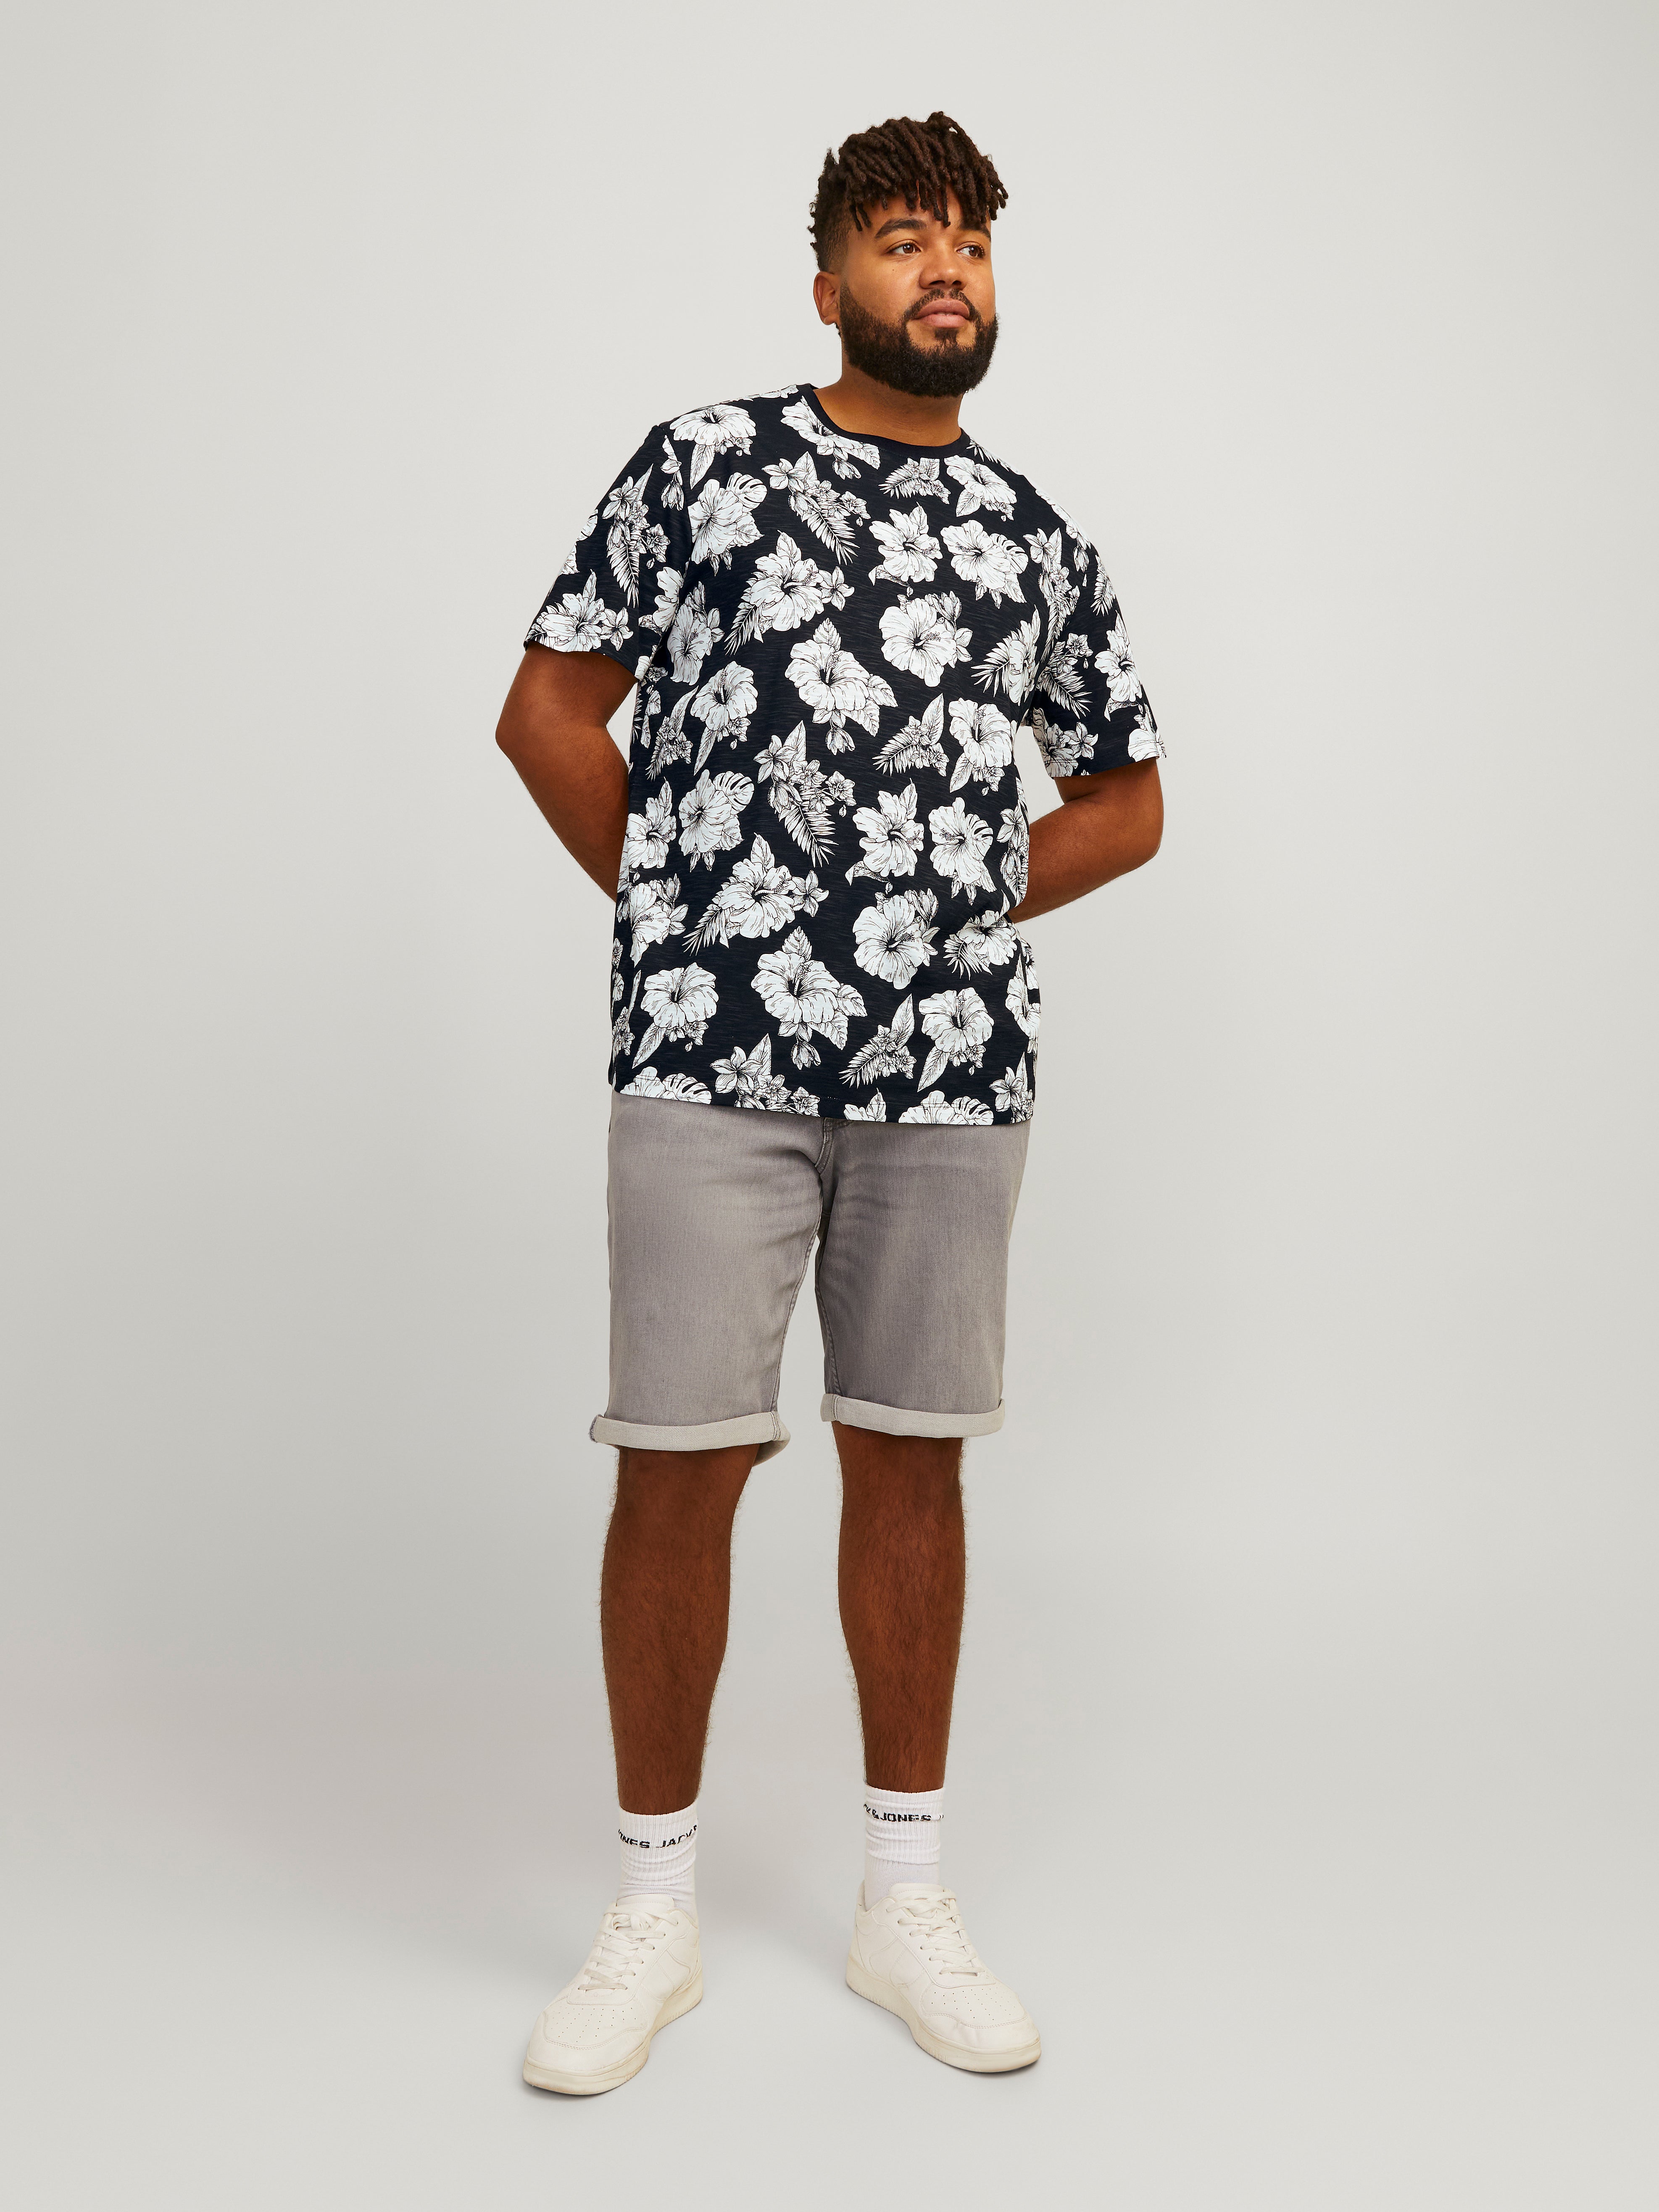 Plus Size T-shirt All Over Print